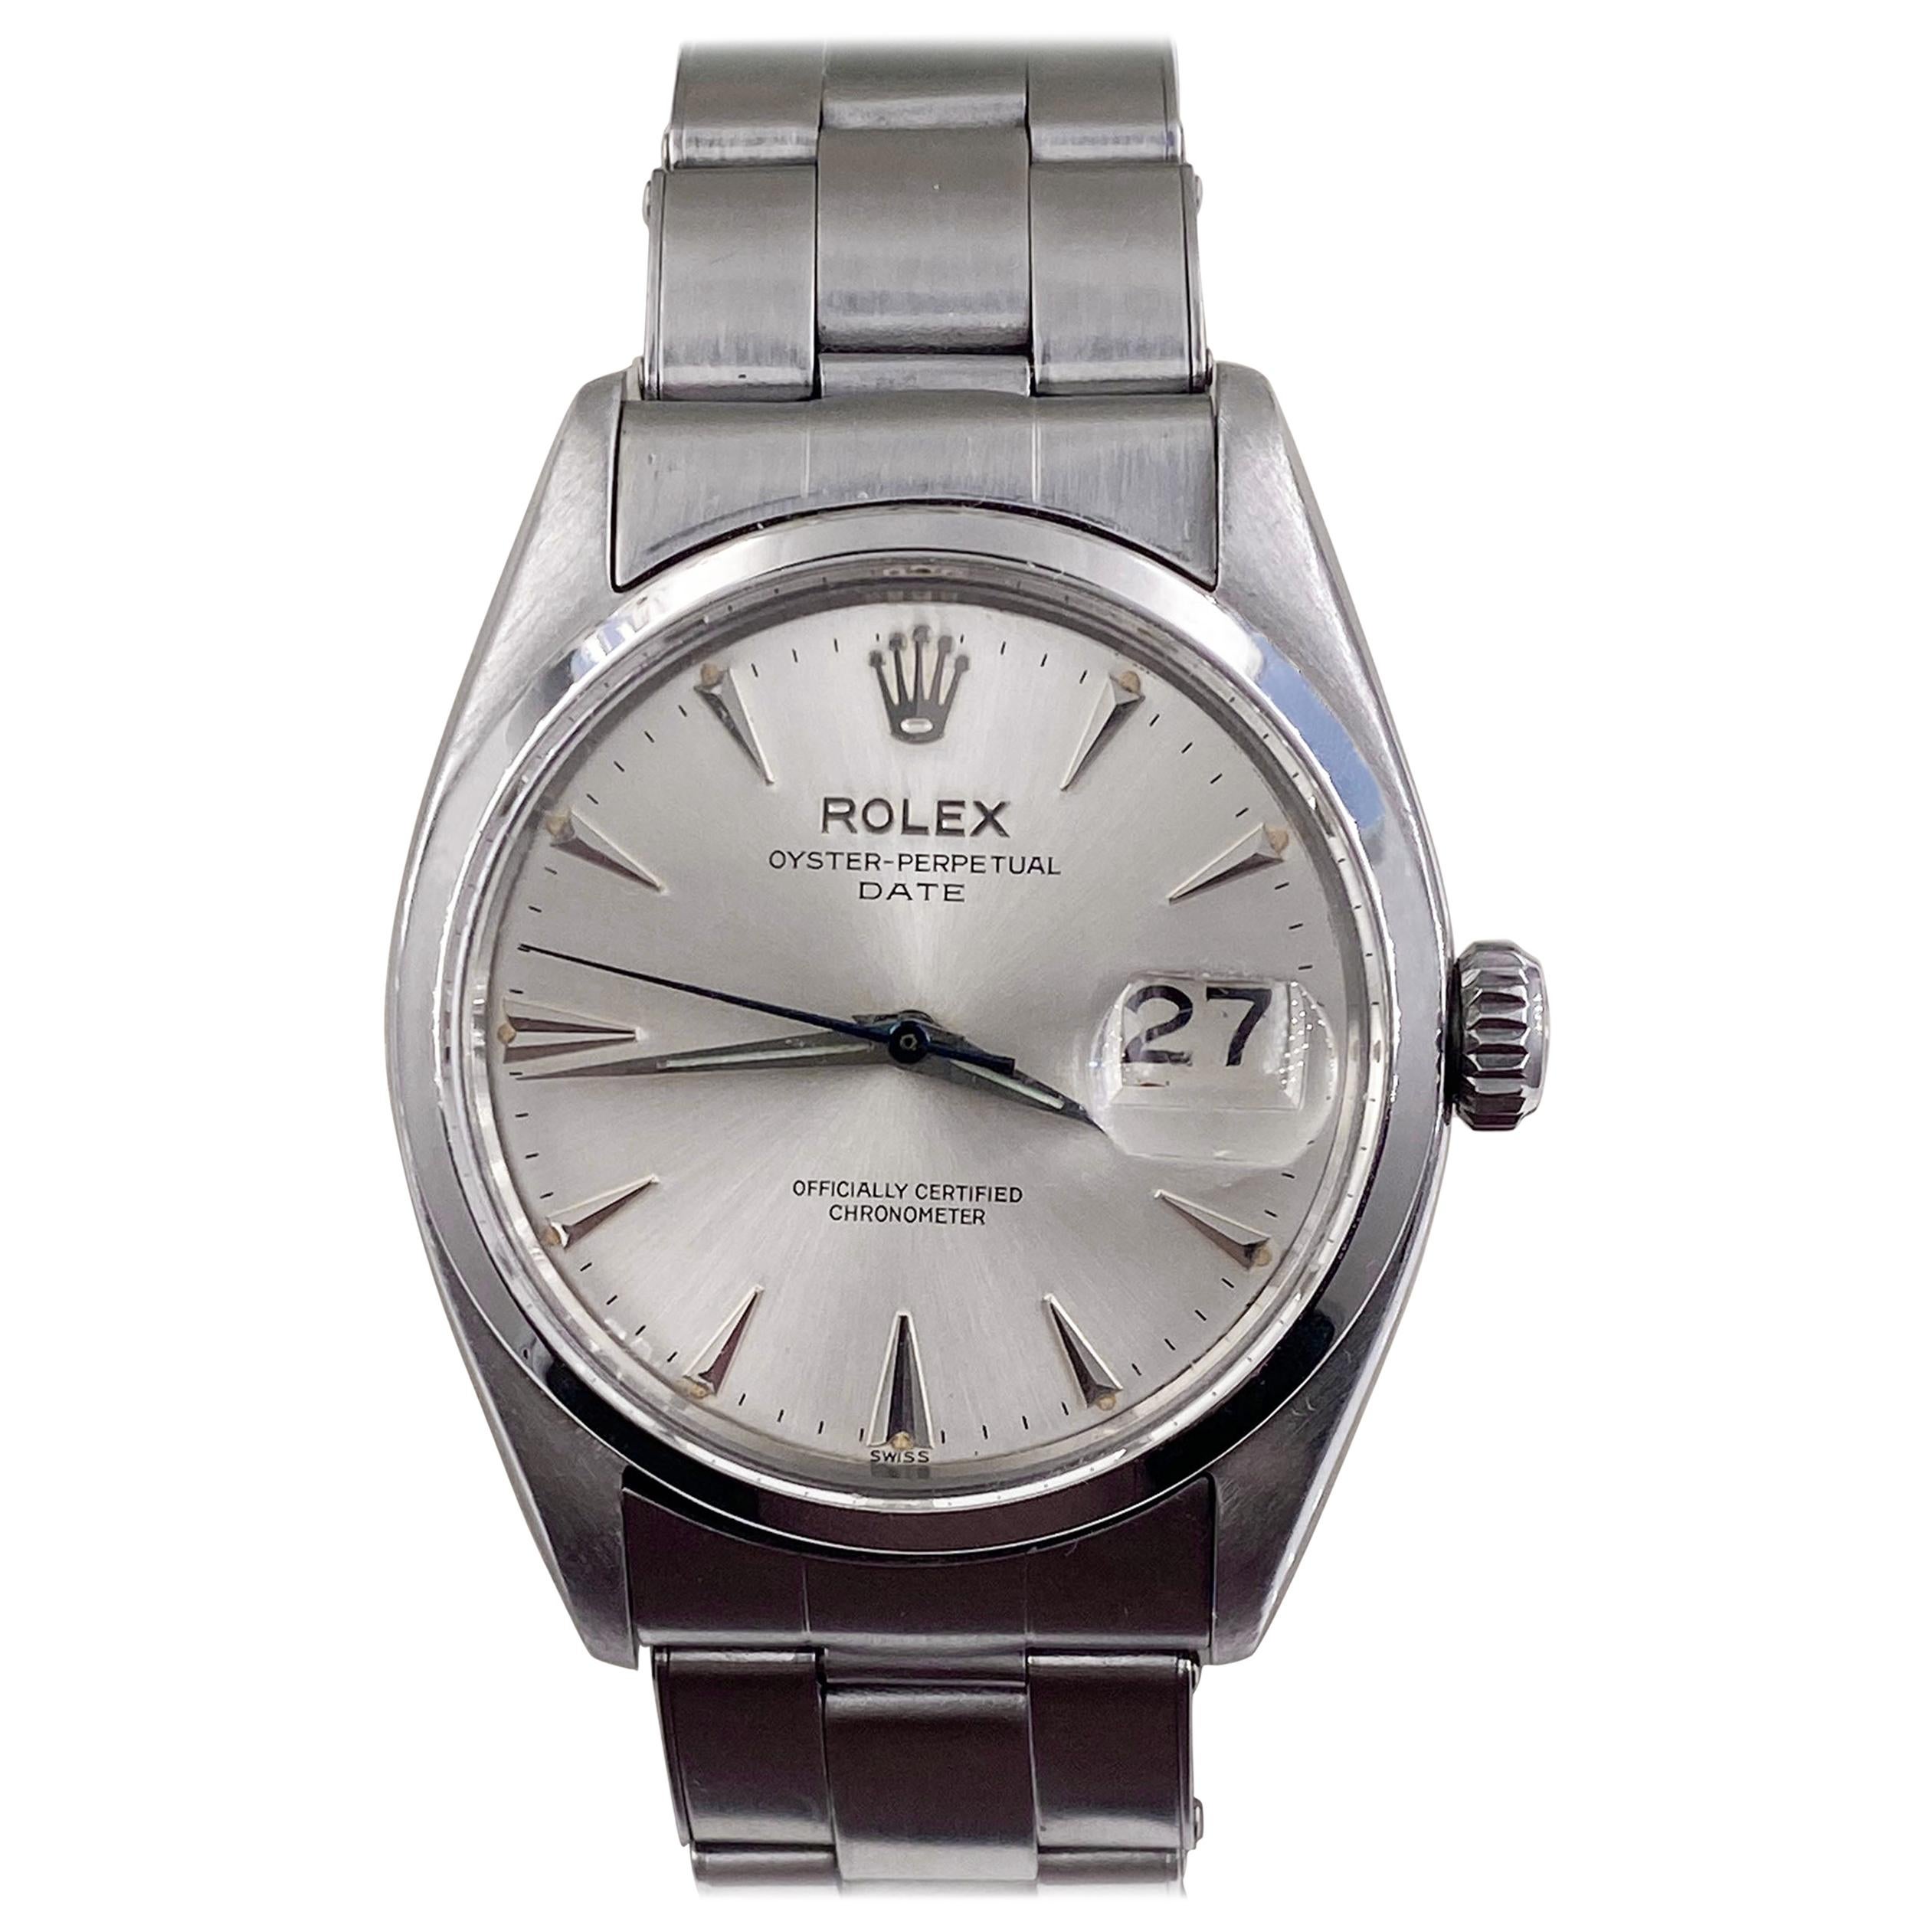 Vintage Rolex Oyster Perpetual Date 6534 Stainless Steel Roulette Date Window